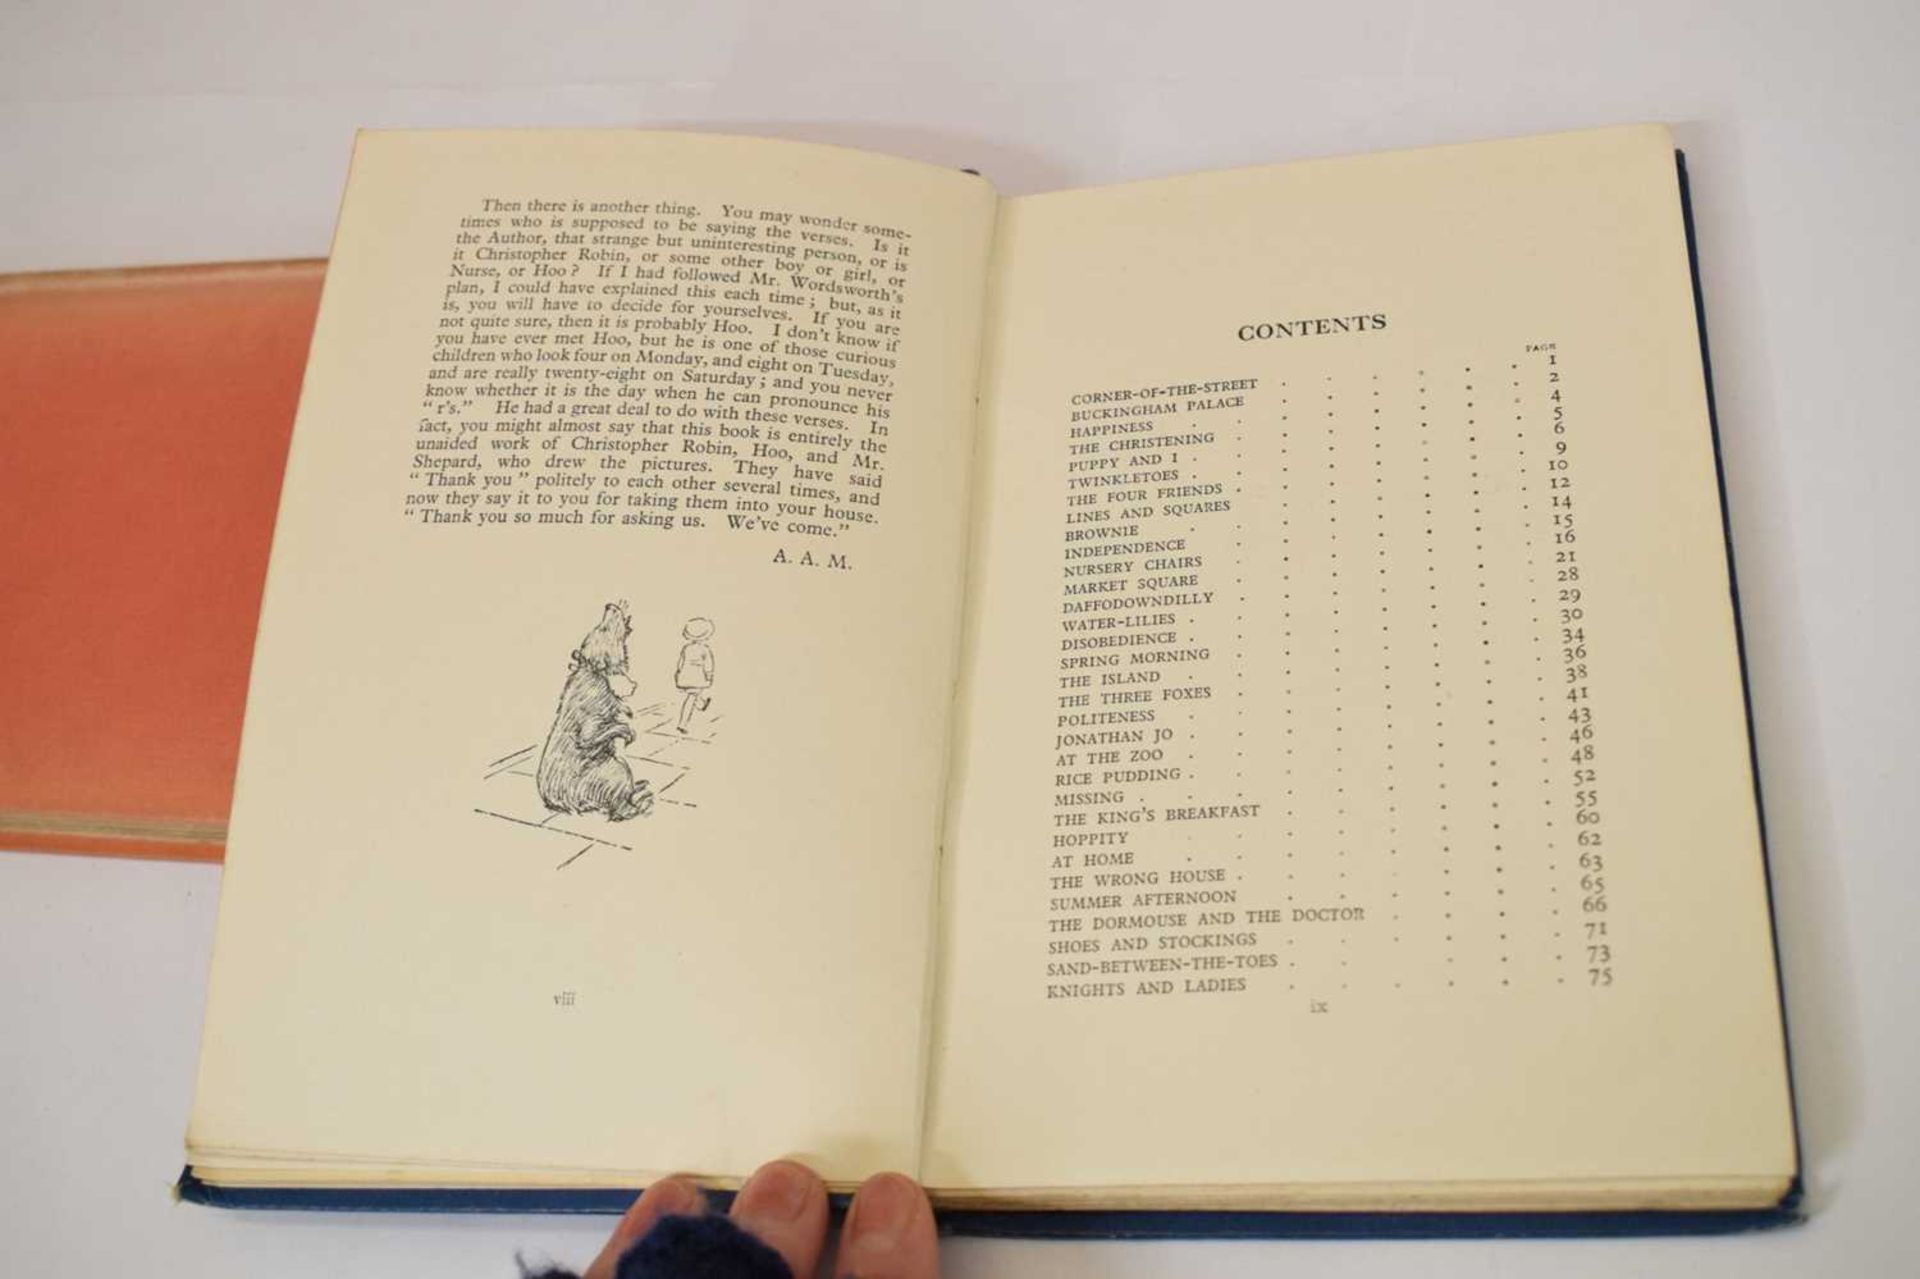 Milne, A. A. - 'The House at Pooh Corner' - First edition, and third edition of 'When We Were Young' - Image 9 of 21